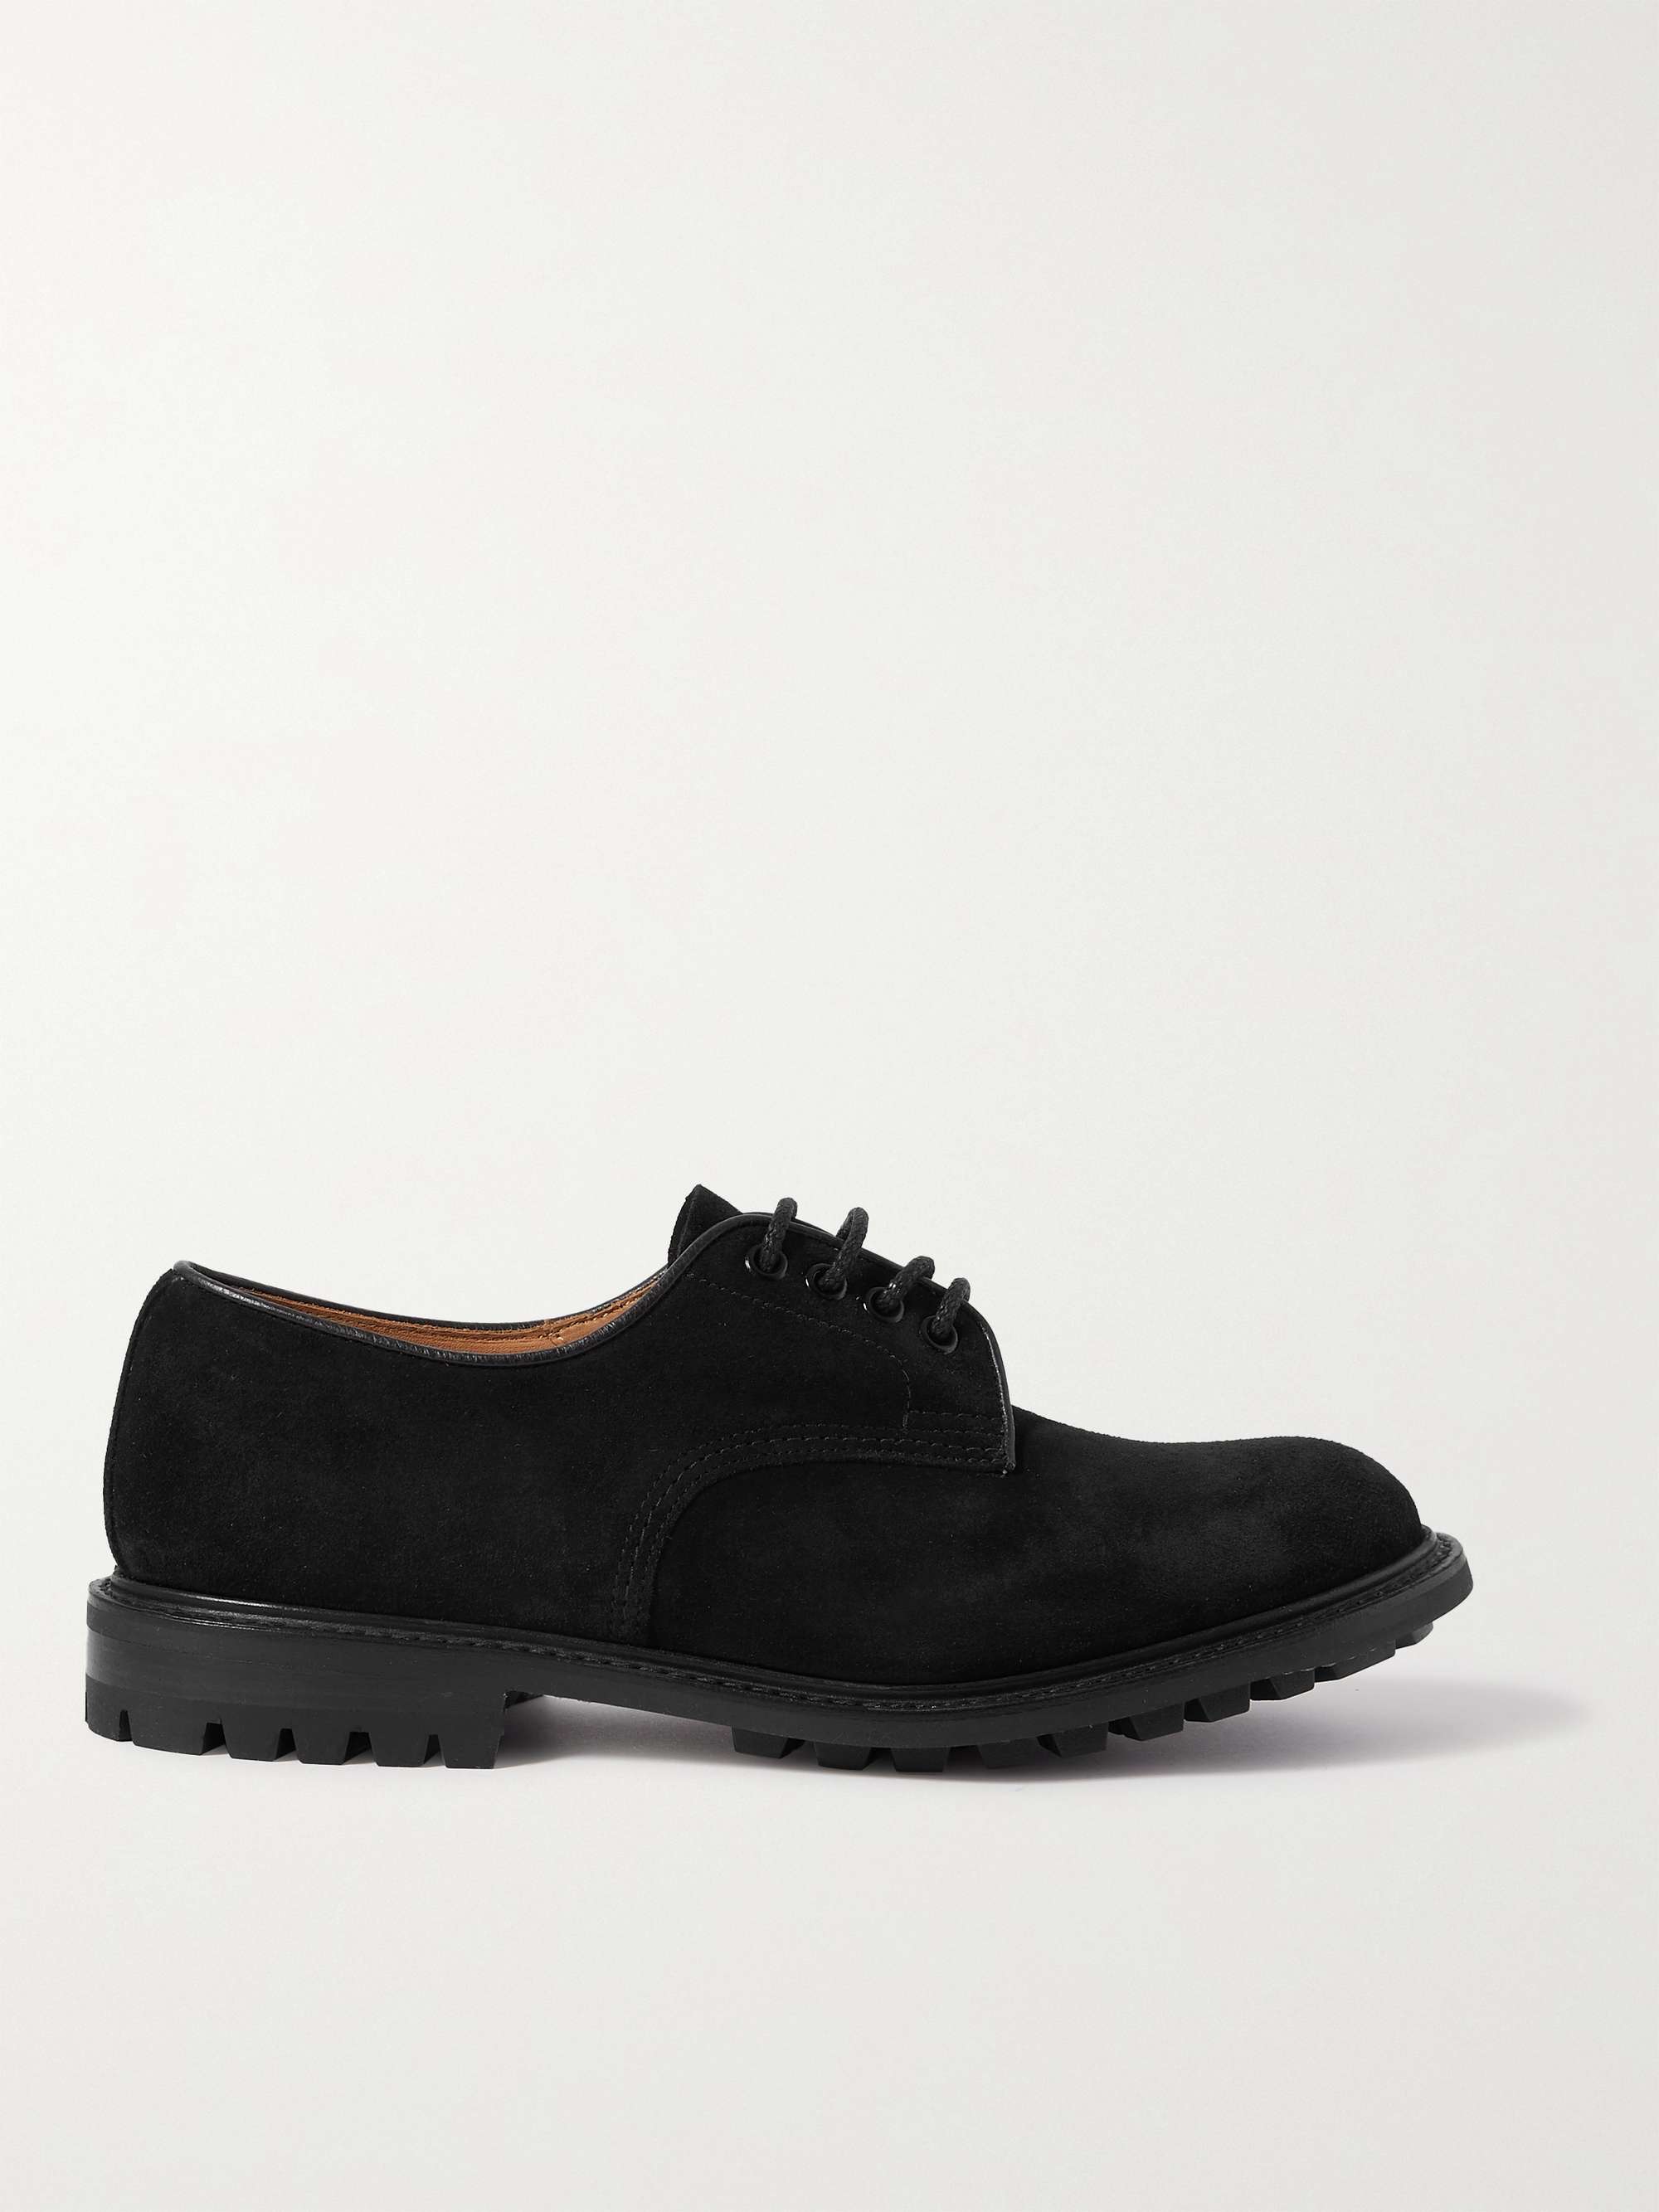 TRICKER'S Daniel Leather-Trimmed Suede Derby Shoes